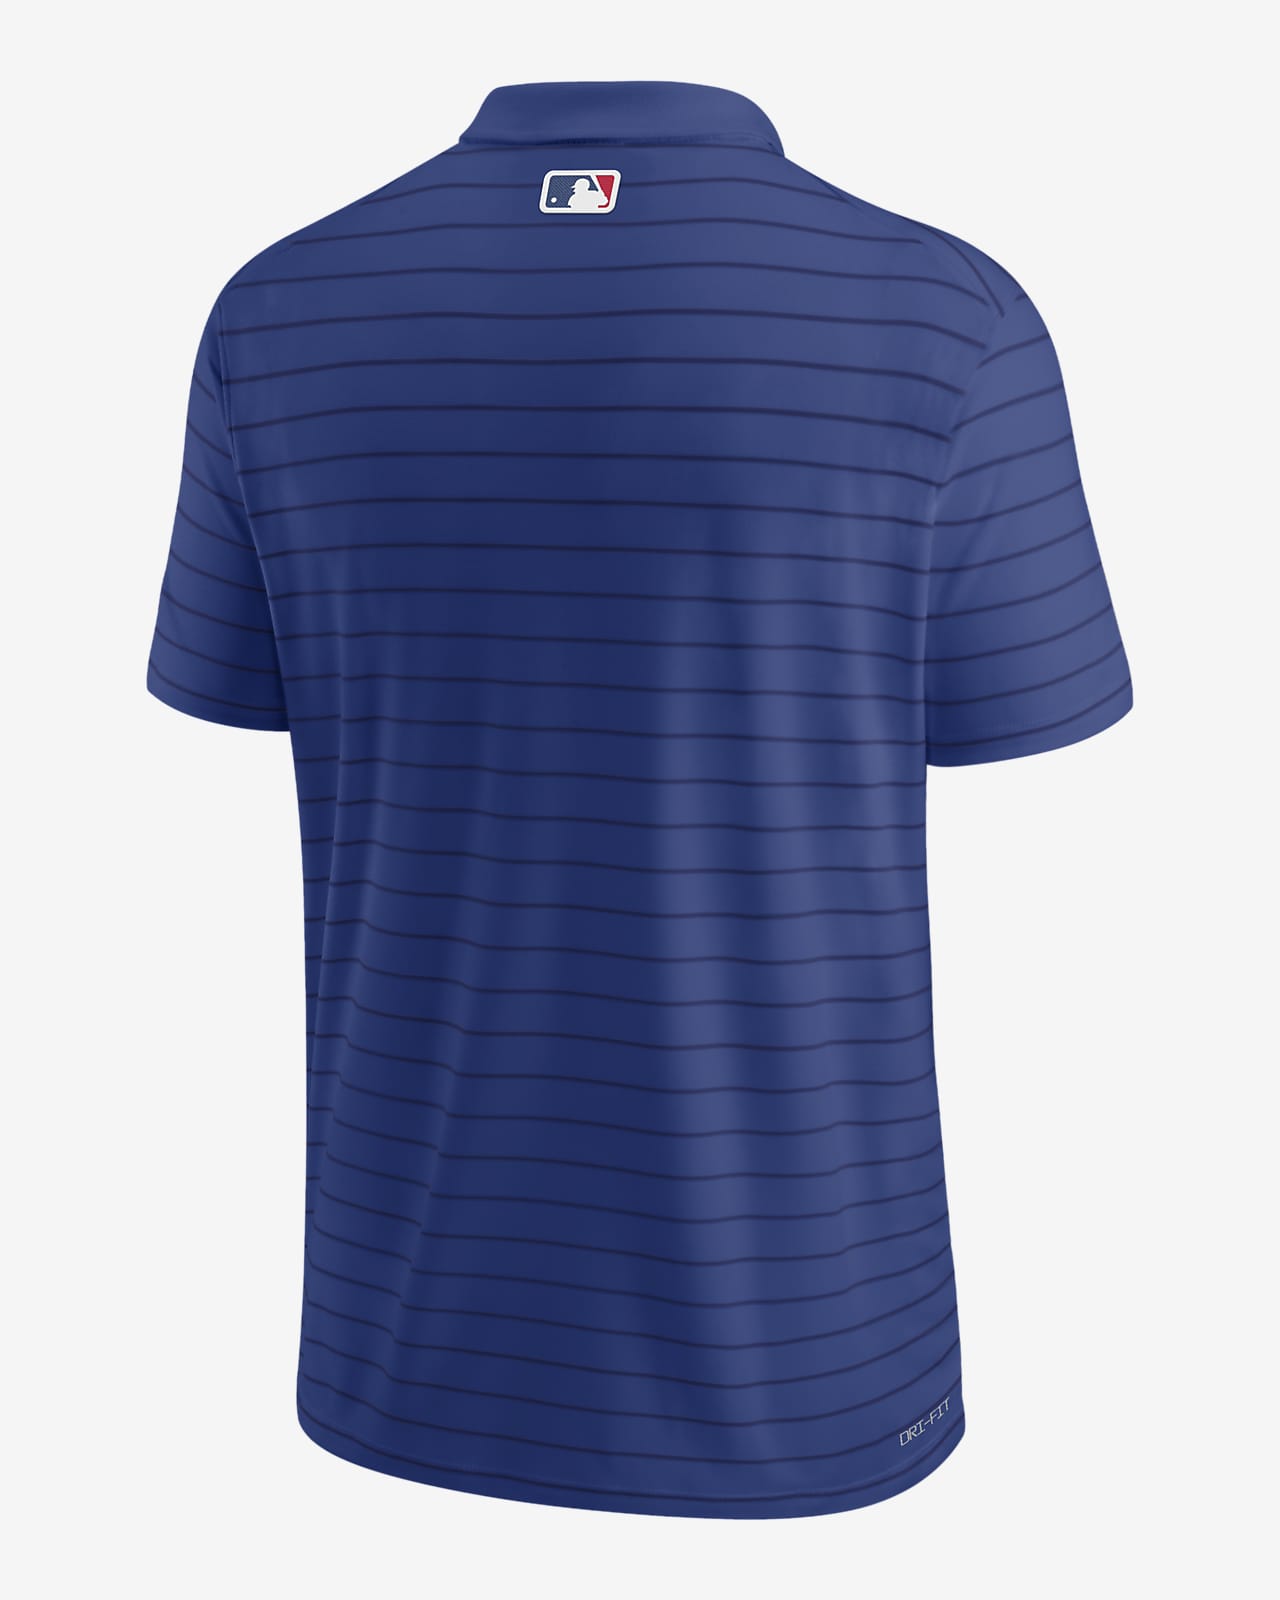 Nike Dri-FIT Victory Striped (MLB Chicago Cubs) Men's Polo.